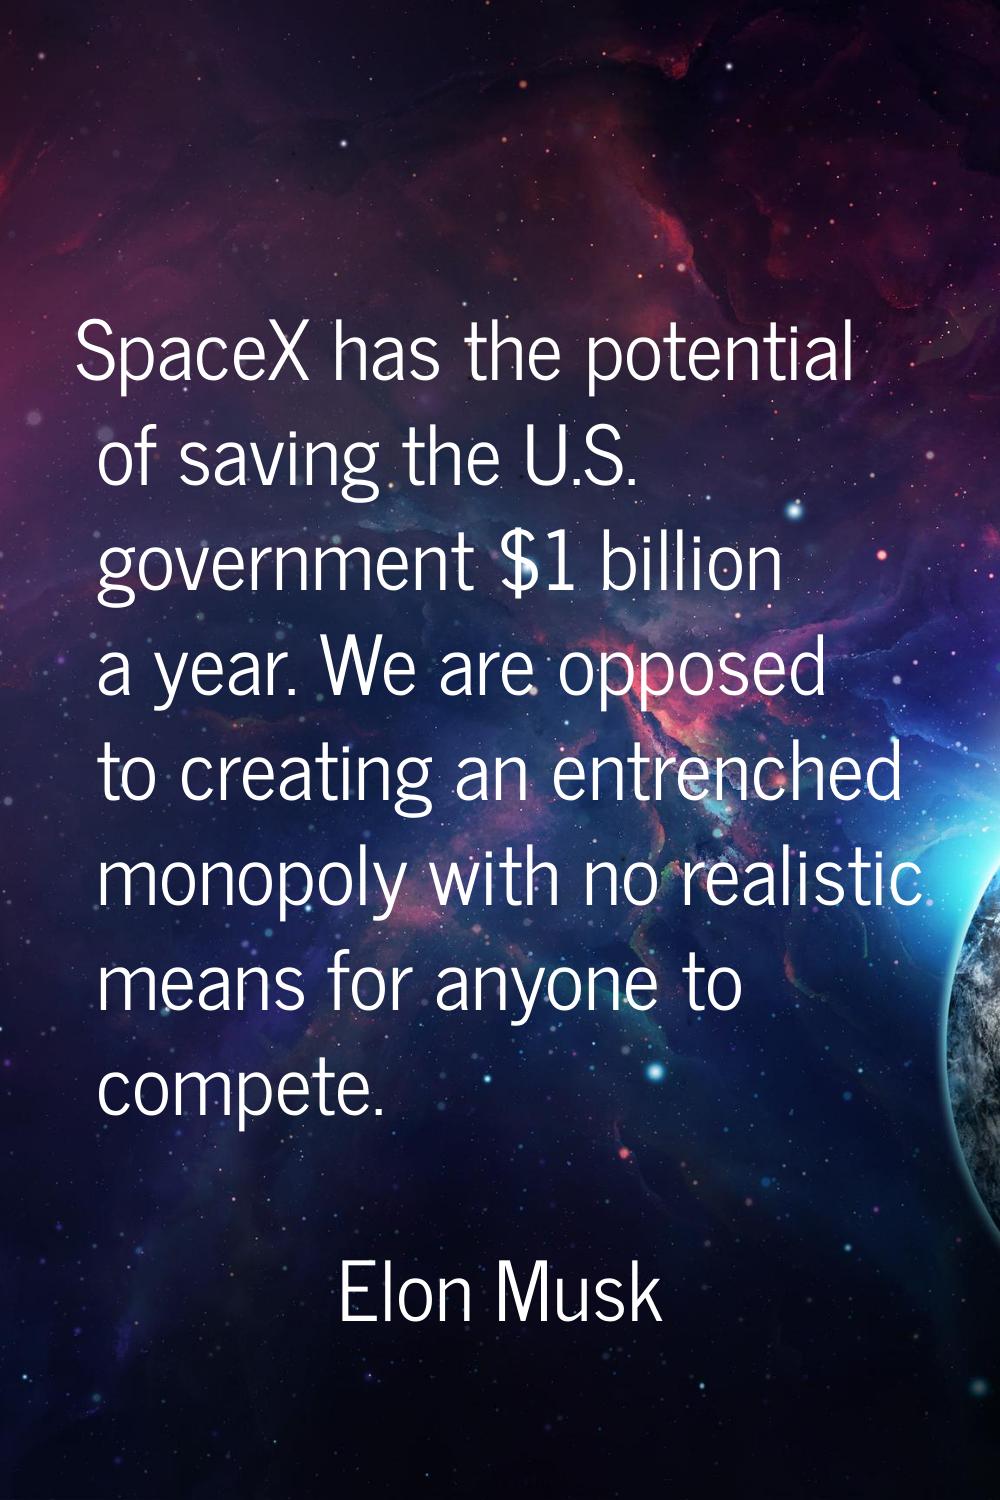 SpaceX has the potential of saving the U.S. government $1 billion a year. We are opposed to creatin